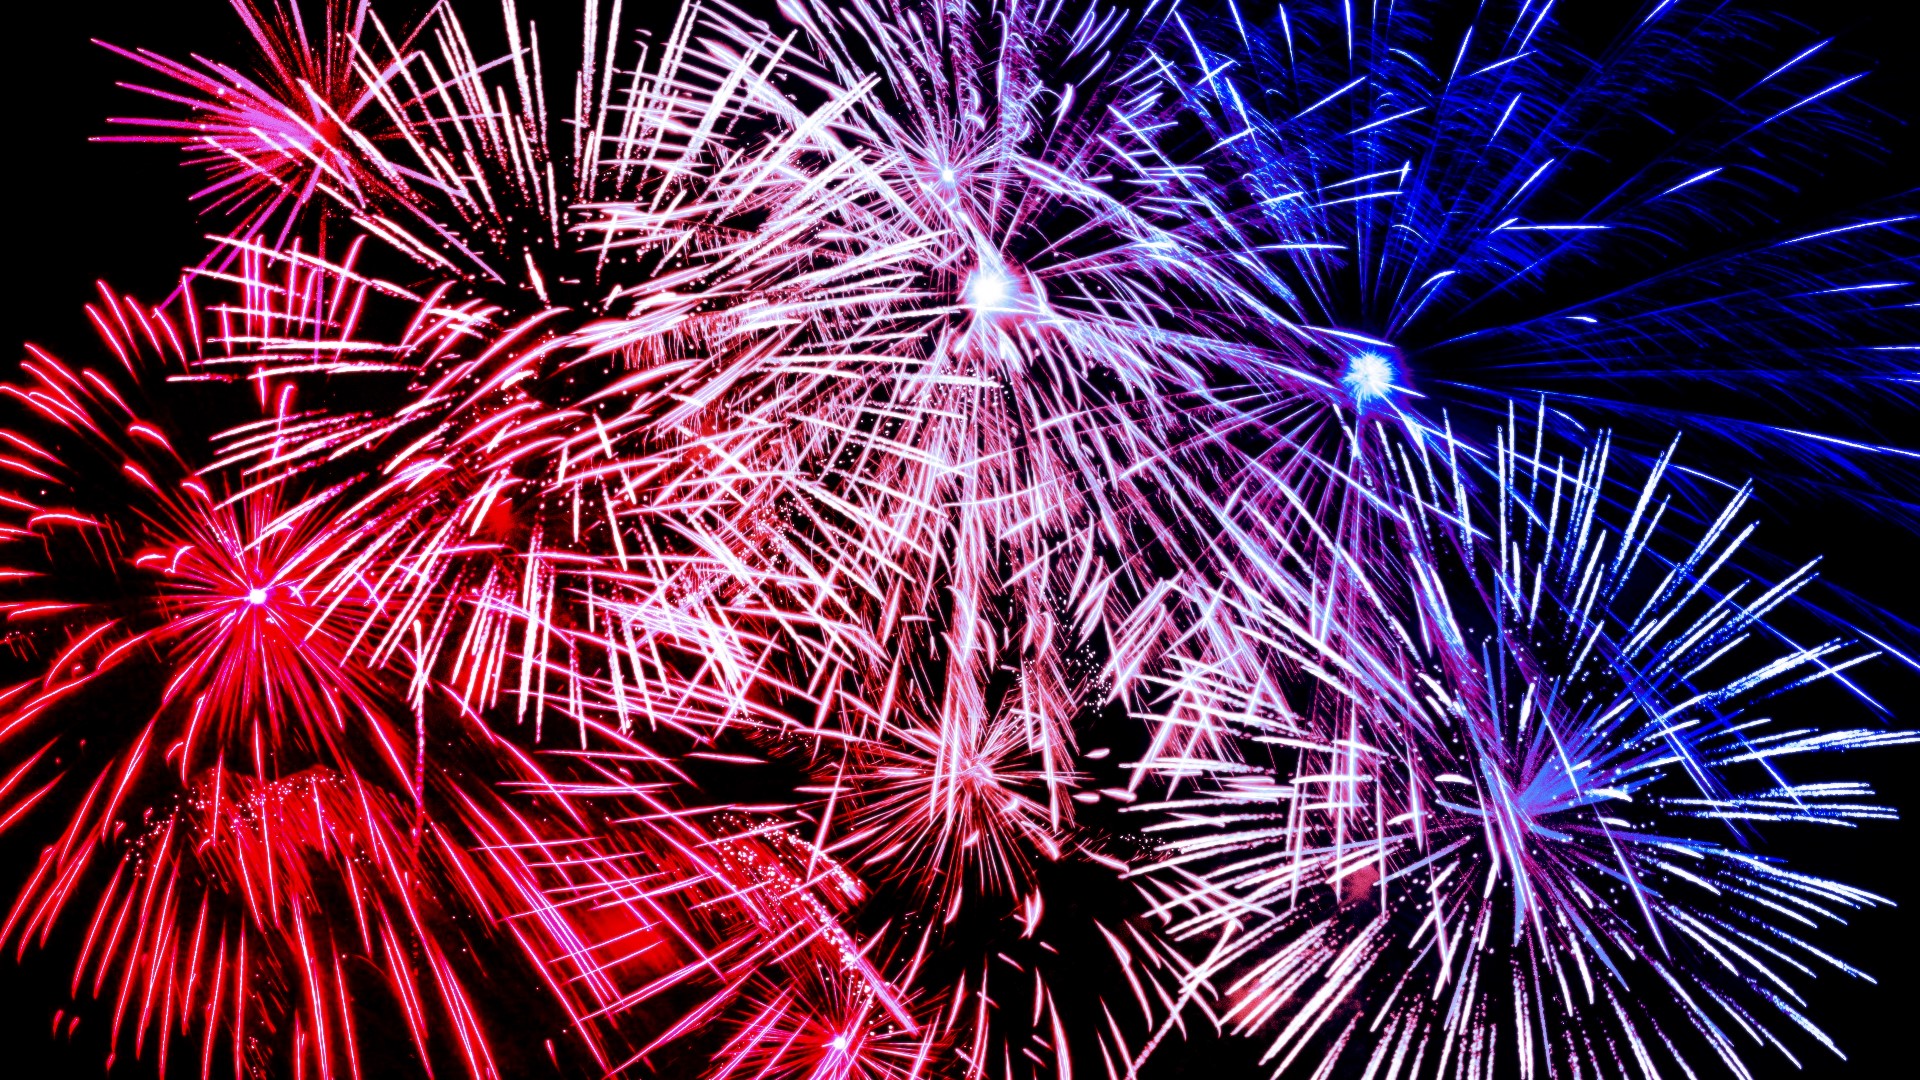 July 4 fireworks in Akron and Rib, White and Blue details